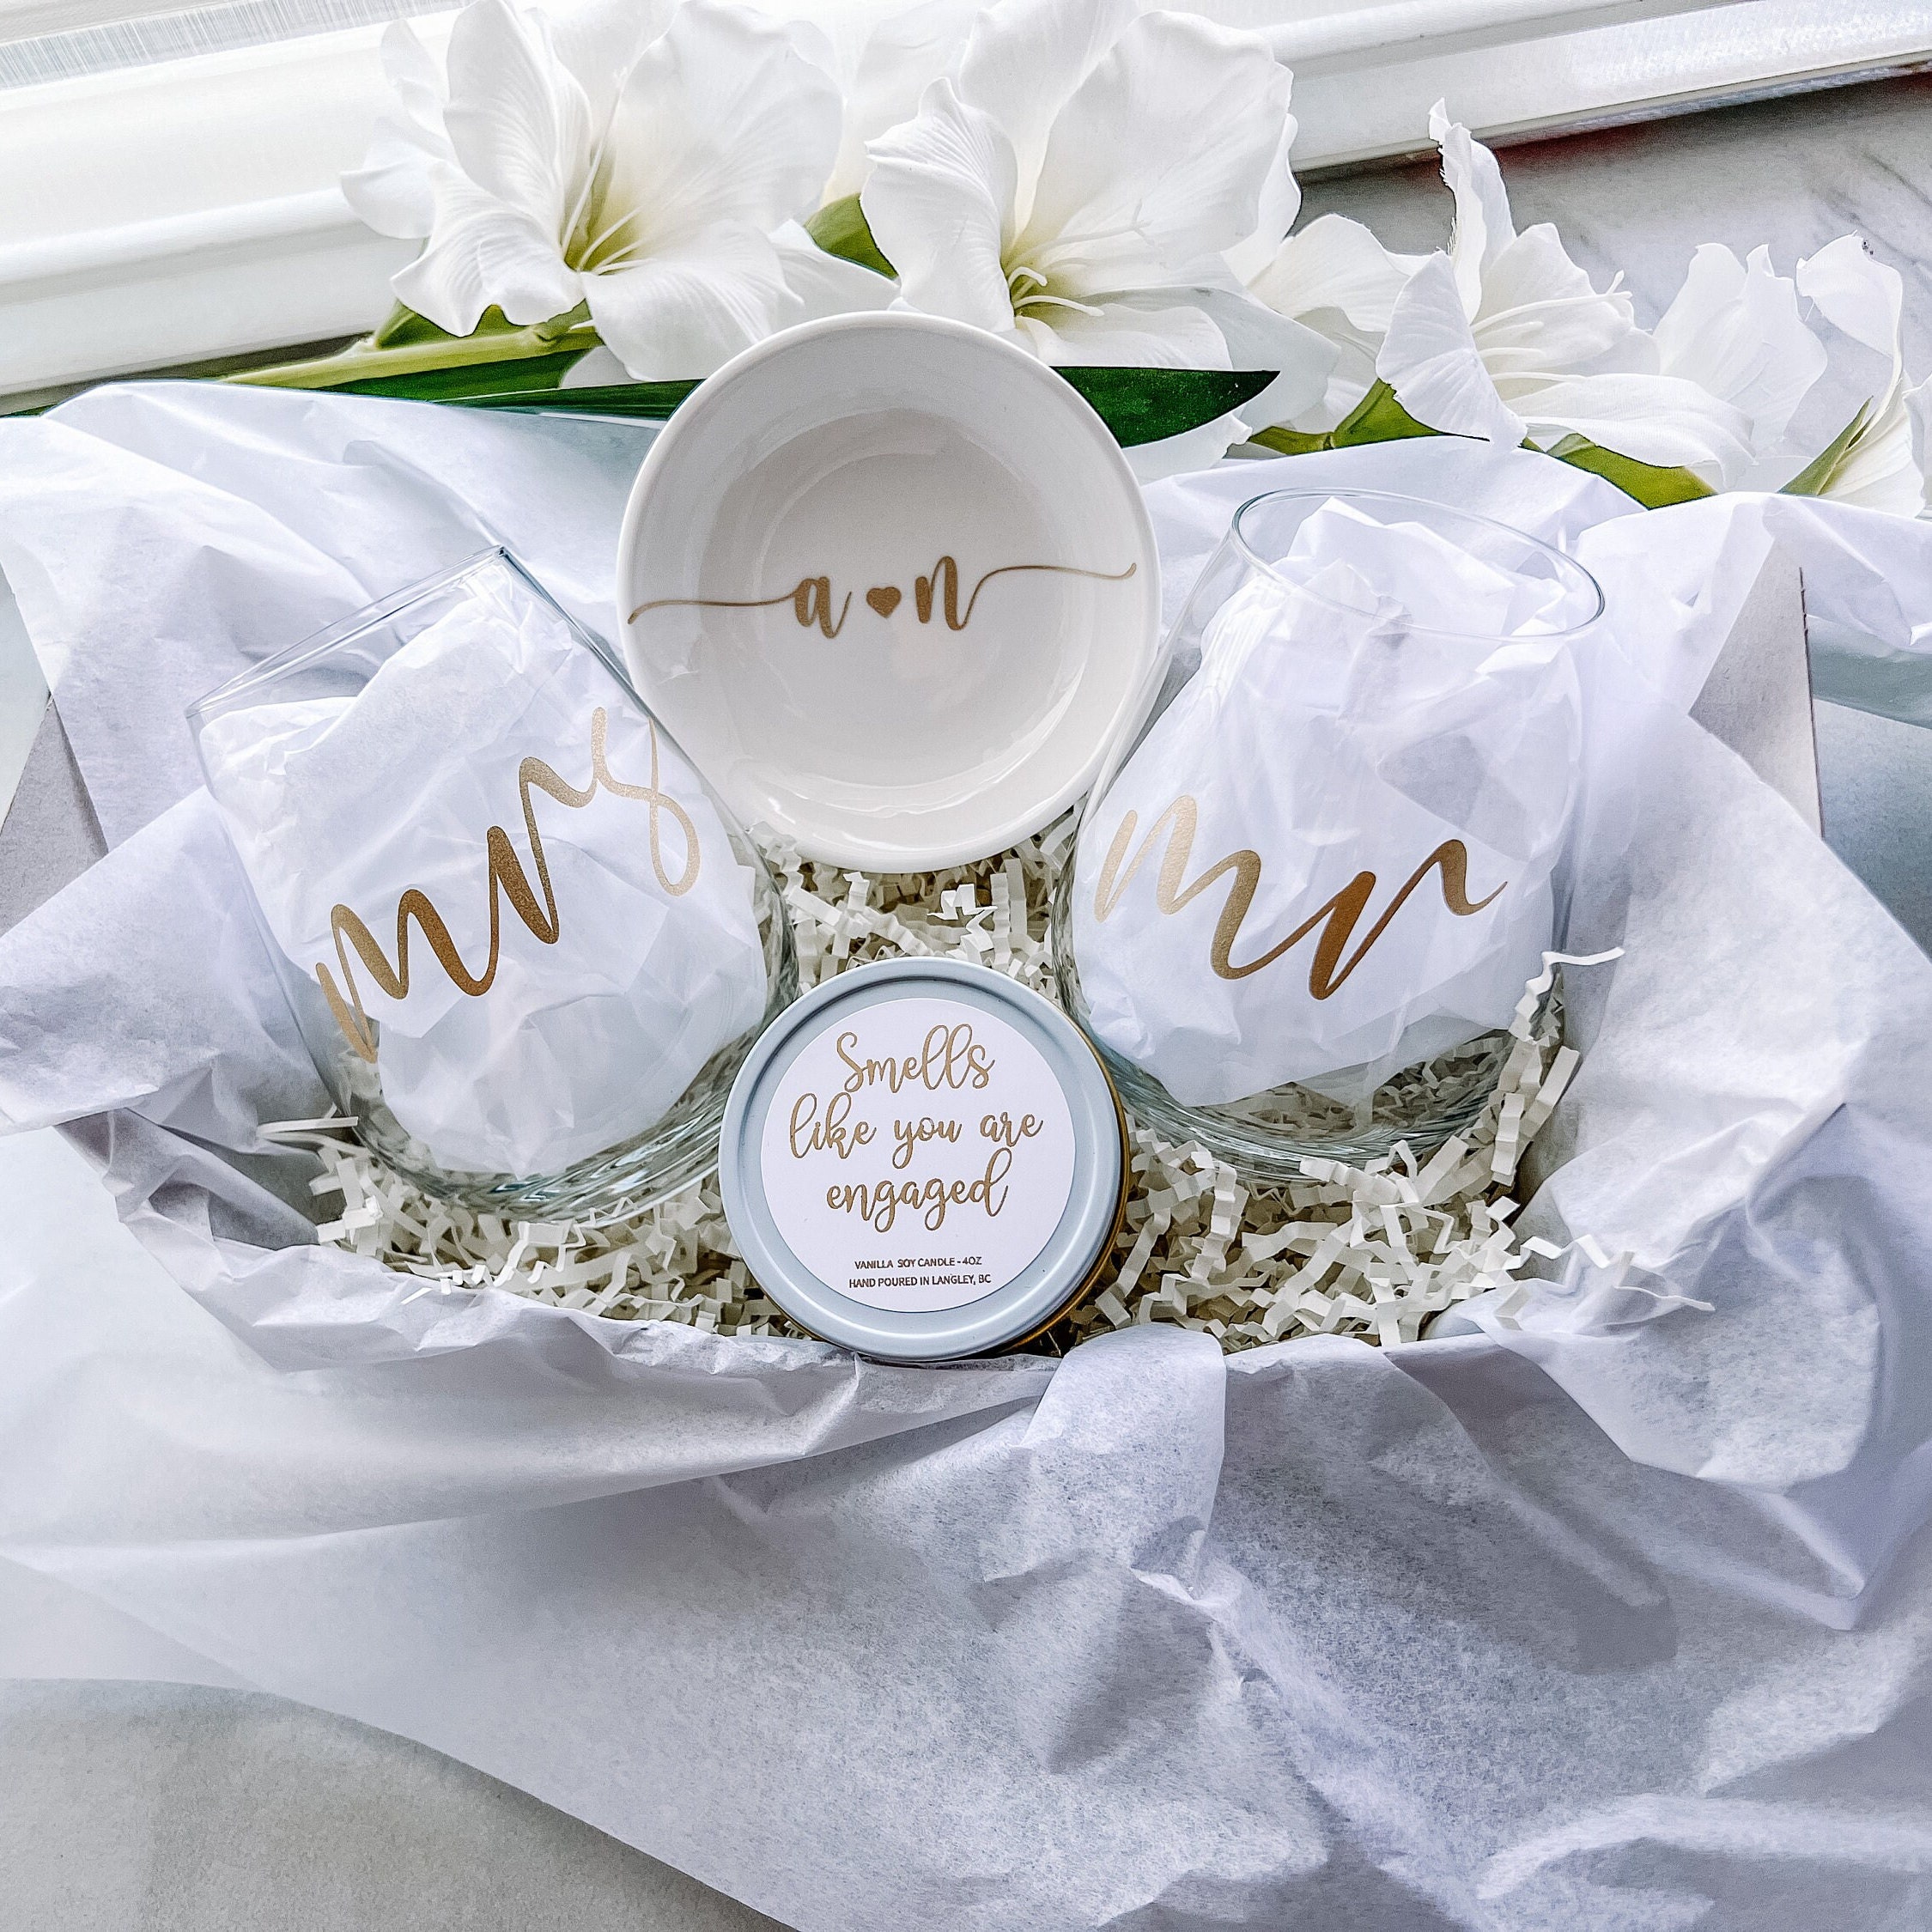 25 Engagement Gifts For Couples That Are Getting Married - Weddingomania